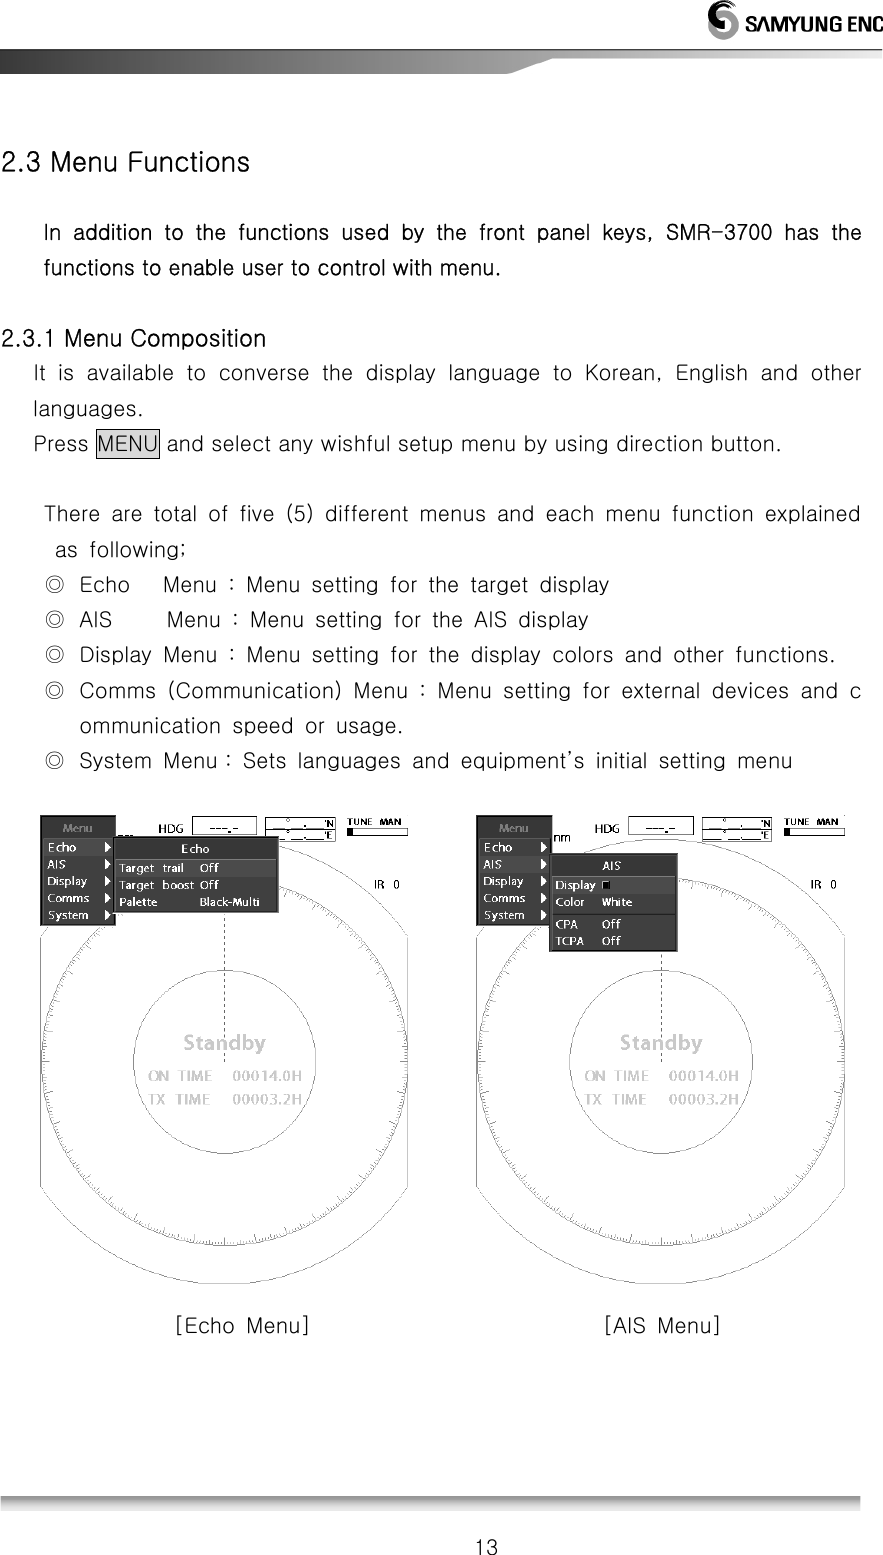   13 2.3 Menu Functions         In  addition  to  the  functions  used  by  the  front  panel  keys,  SMR-3700  has  the functions to enable user to control with menu.  2.3.1 Menu Composition    It is available to converse the display language to Korean, English  and  other languages.    Press MENU and select any wishful setup menu by using direction button.  There  are  total  of  five  (5)  different  menus  and  each  menu  function  explained   as  following; ◎ Echo   Menu : Menu setting for the target display ◎ AIS     Menu : Menu setting for the AIS display ◎ Display Menu : Menu setting for the display colors and other functions. ◎ Comms  (Communication)  Menu  :  Menu  setting  for  external  devices  and  communication  speed  or  usage. ◎ System Menu : Sets languages and equipment’s initial setting menu                [Echo Menu]                           [AIS Menu]     